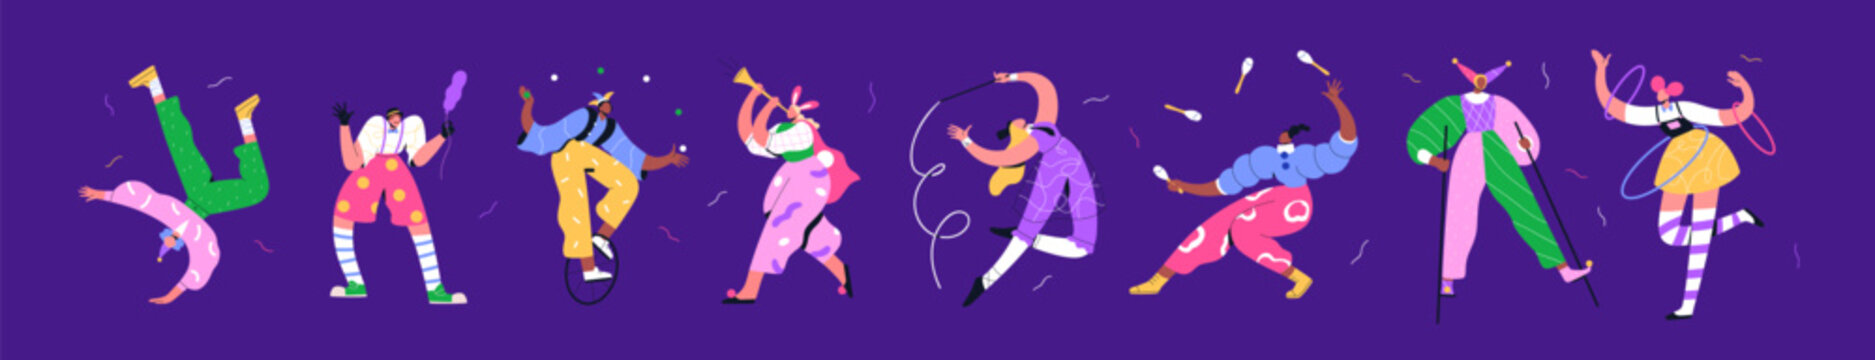 Carnival and circus acrobats, clowns, jugglers and jesters set. Harlequins, jokers, funny artists, comic actors, gymnasts, comedians performing on stilts, unicycle, juggling. Flat vector illustration